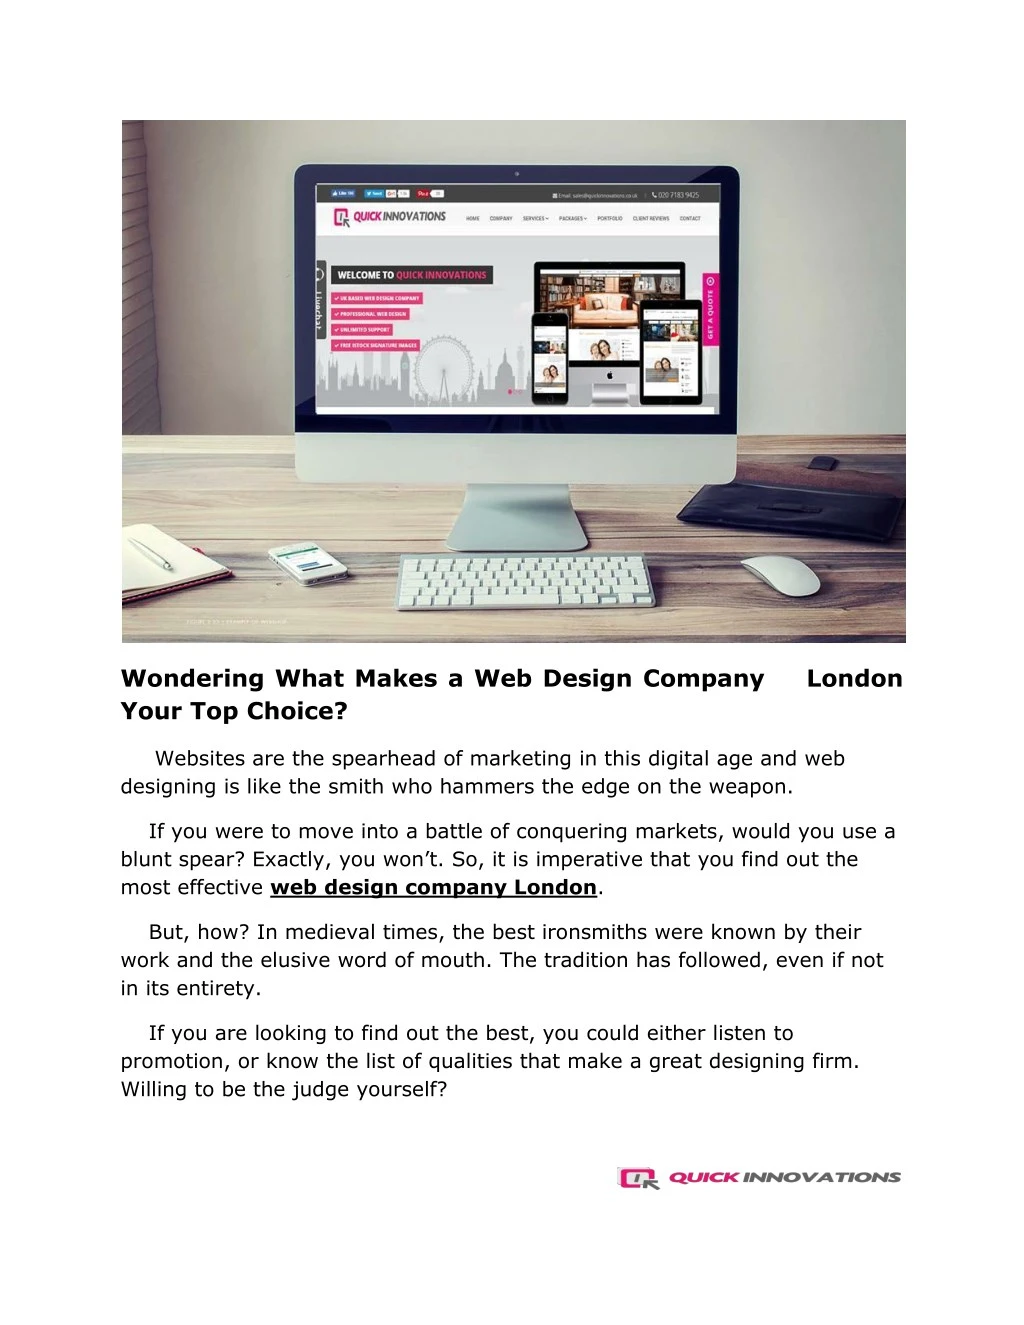 wondering what makes a web design company london